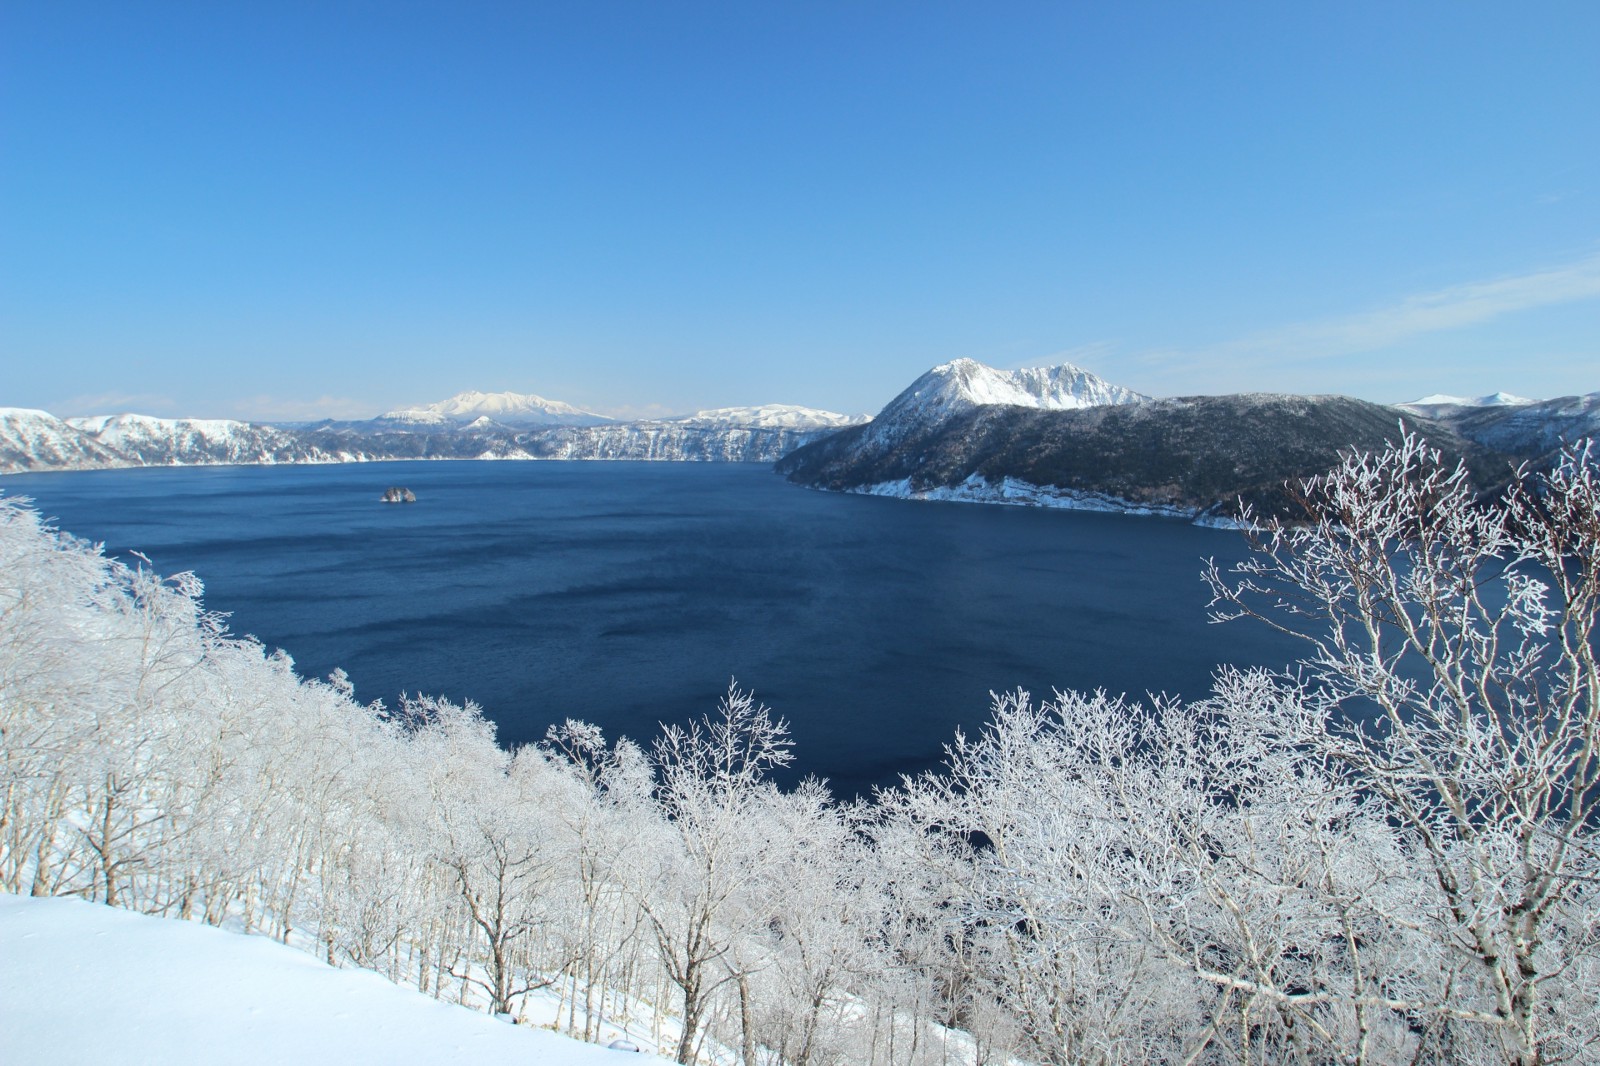 Lake Mashu covered with white snow during winter